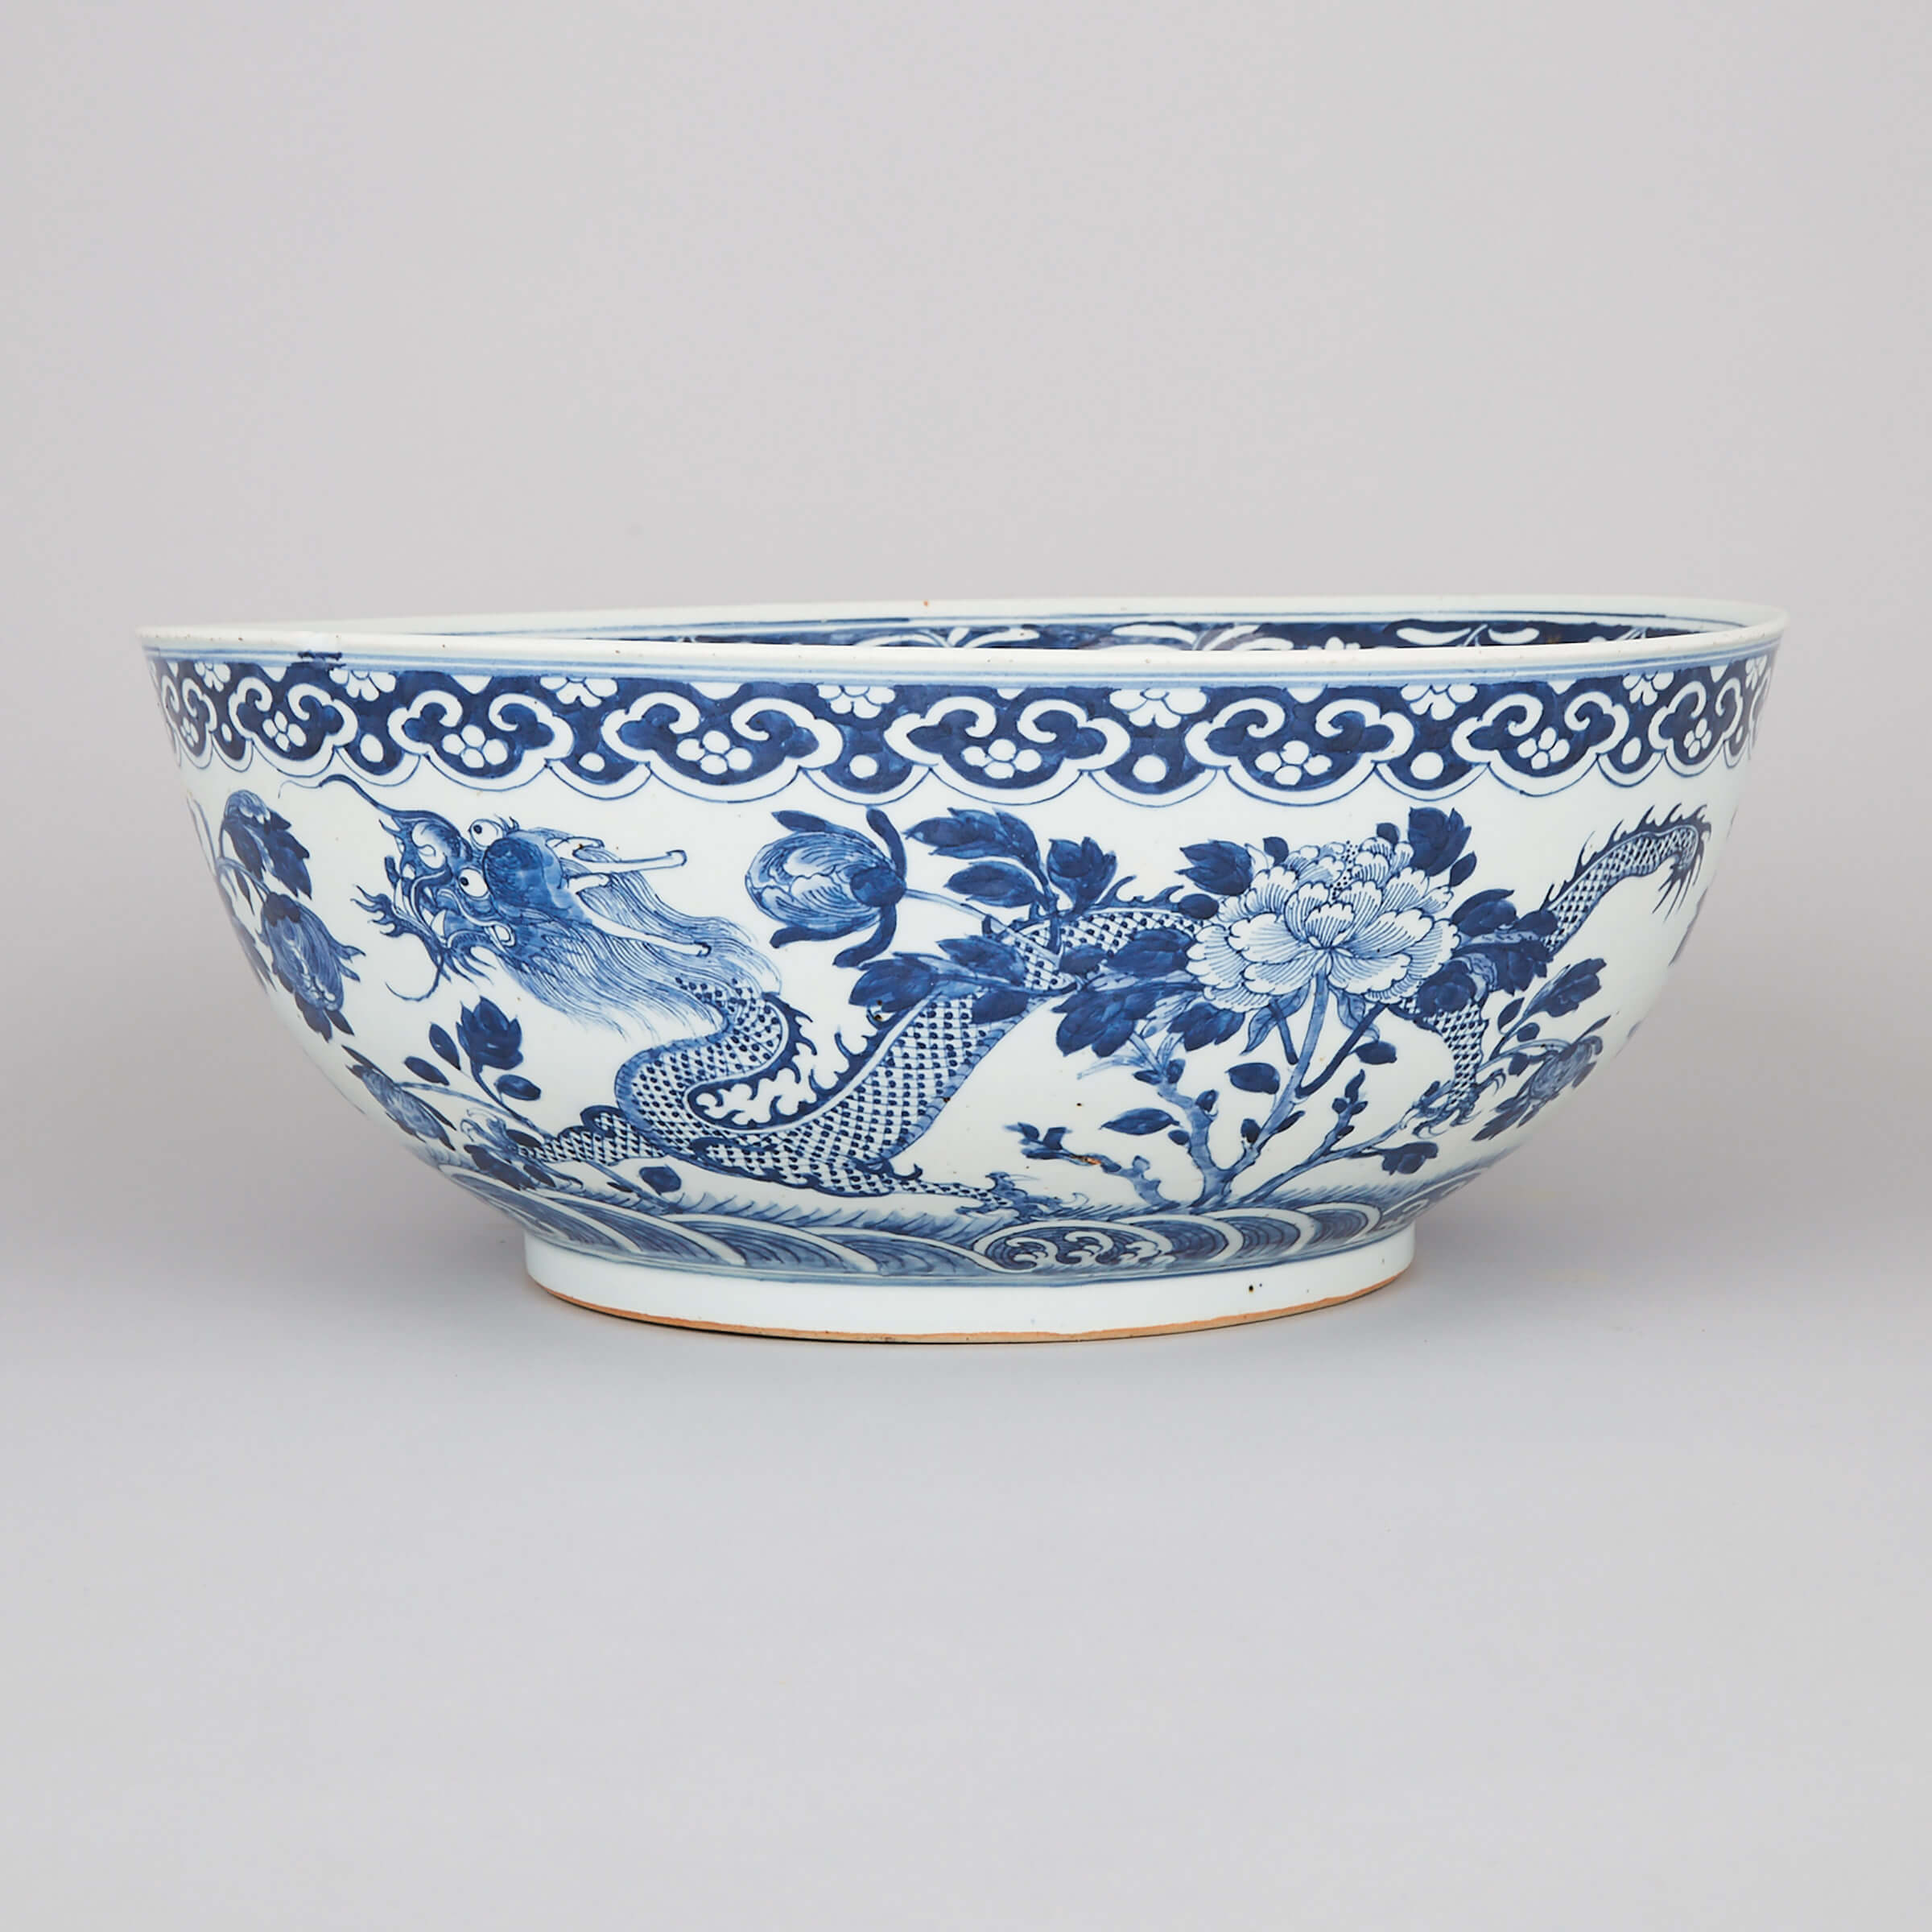 A Massive Blue and White Punch Bowl, 19th Century